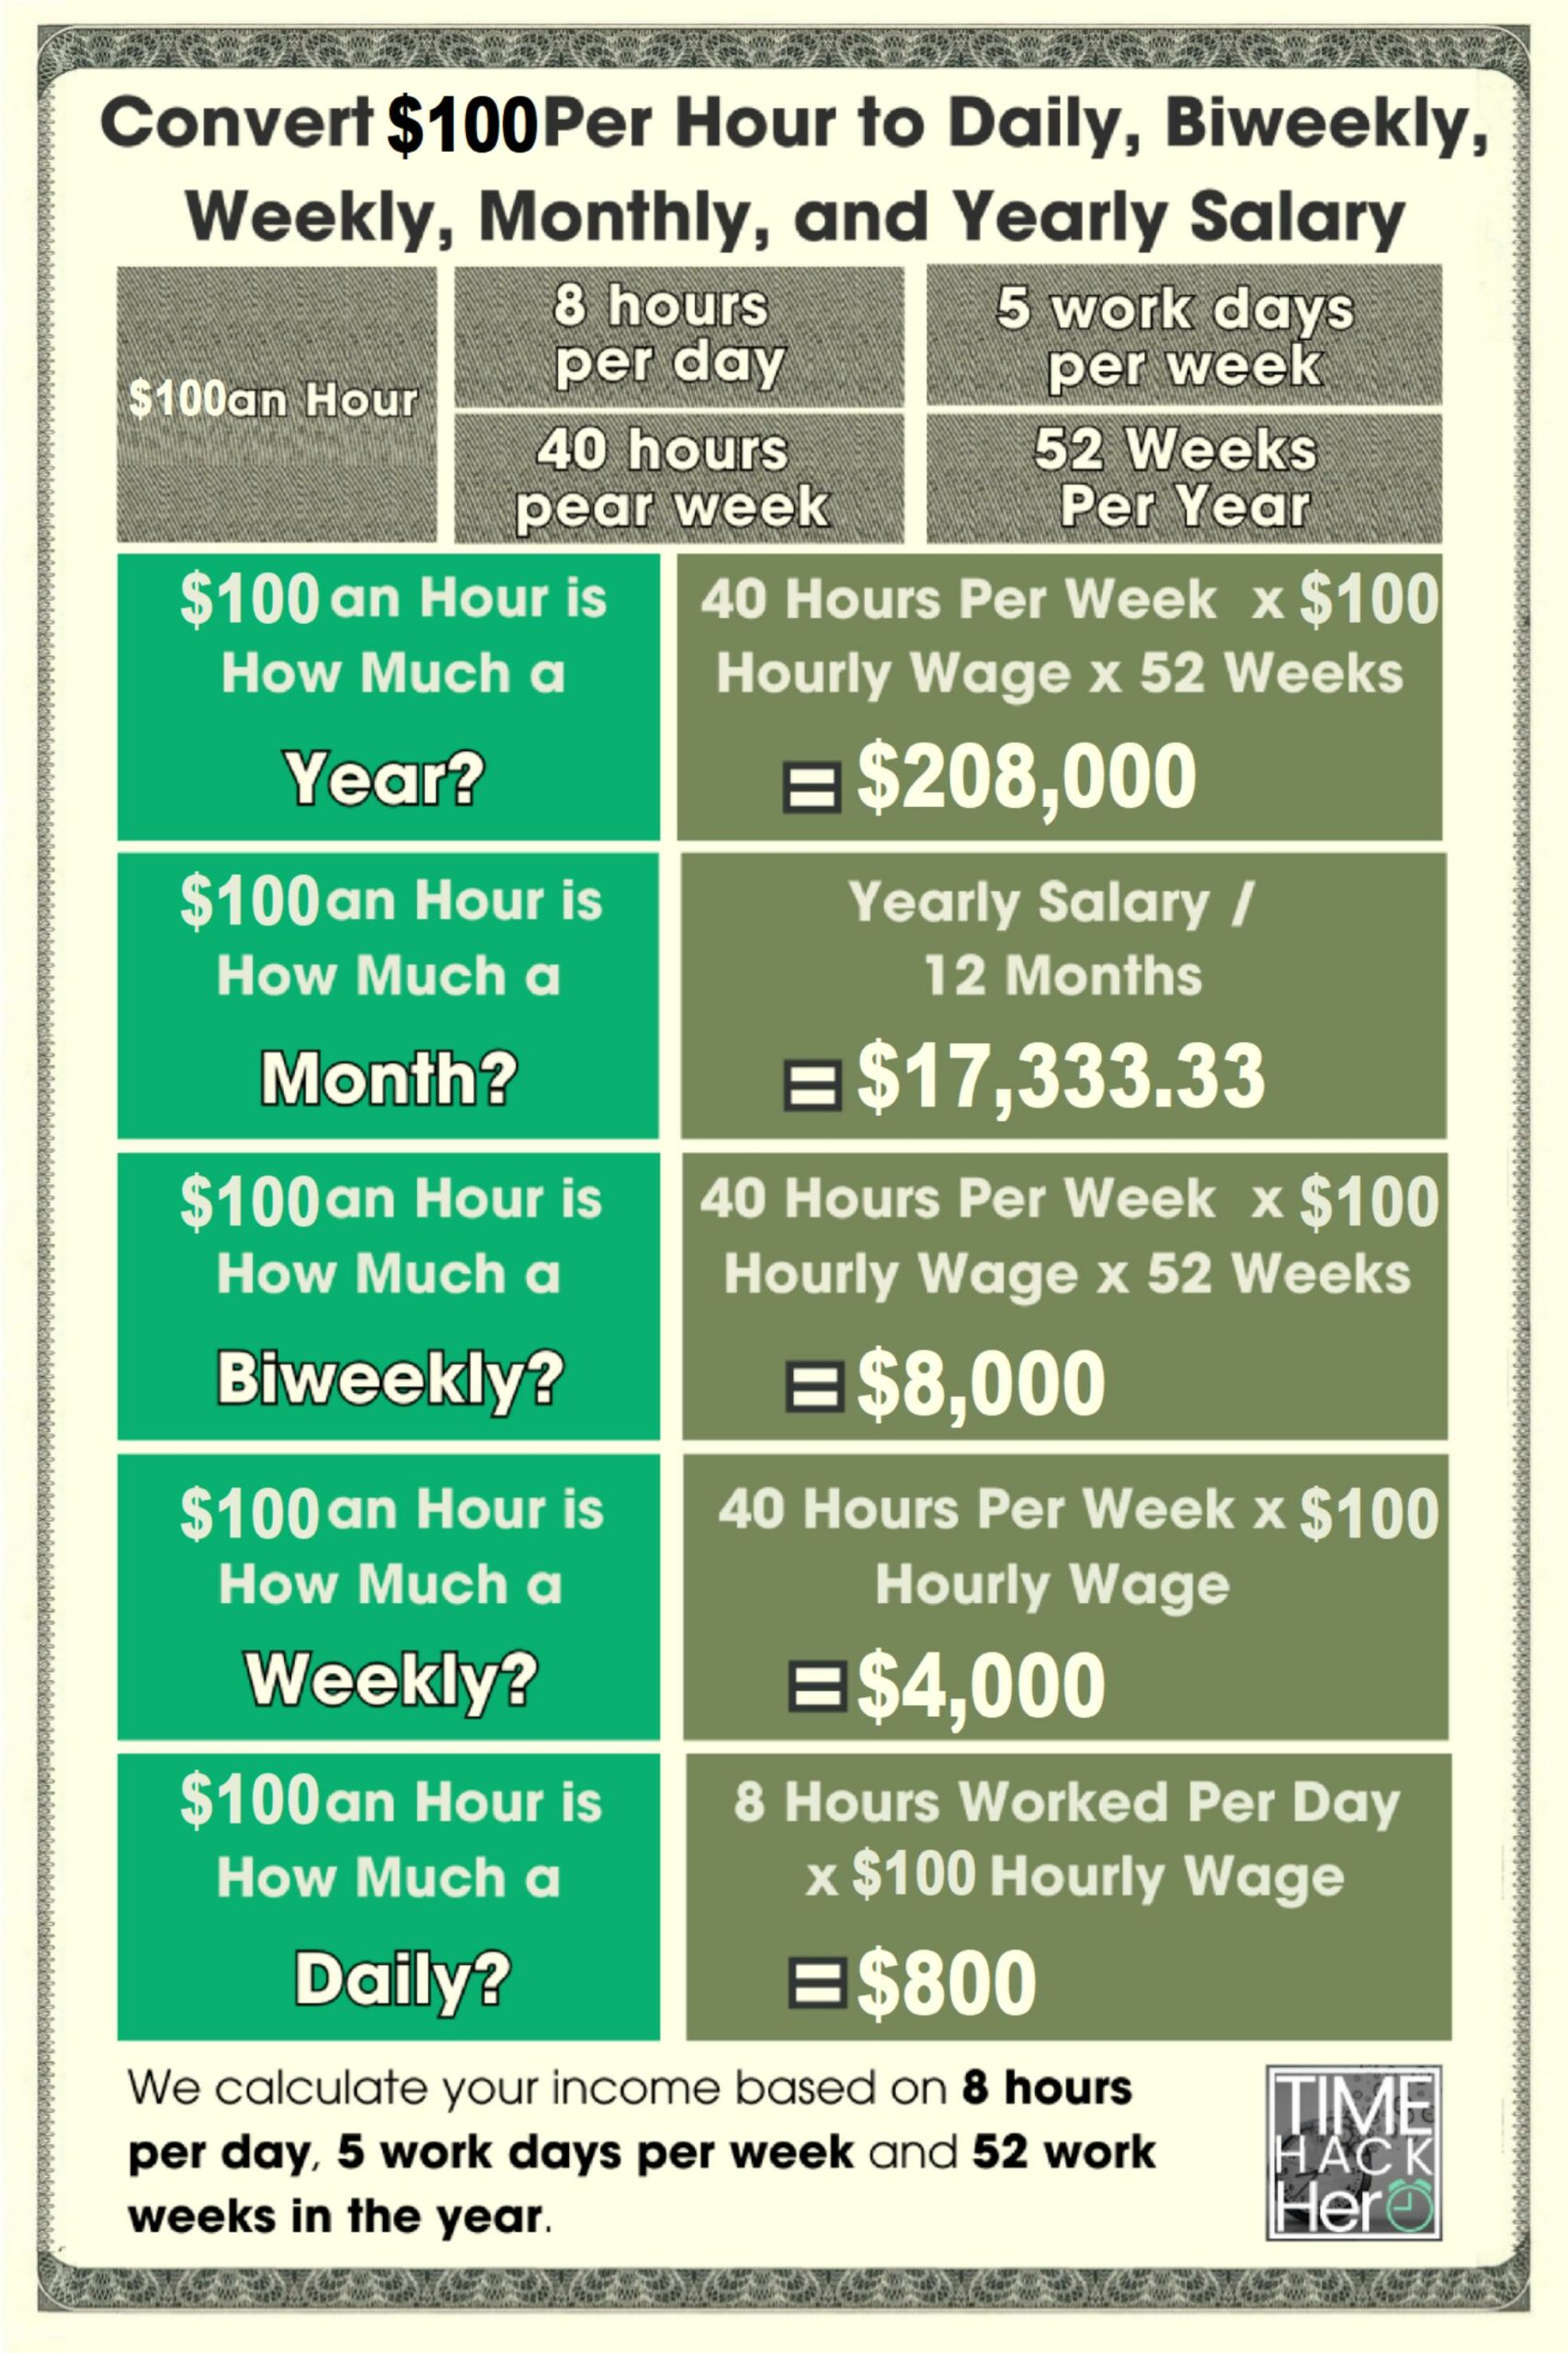 Convert $100 Per Hour to Daily, Biweekly, Weekly, Monthly, and Yearly Salary